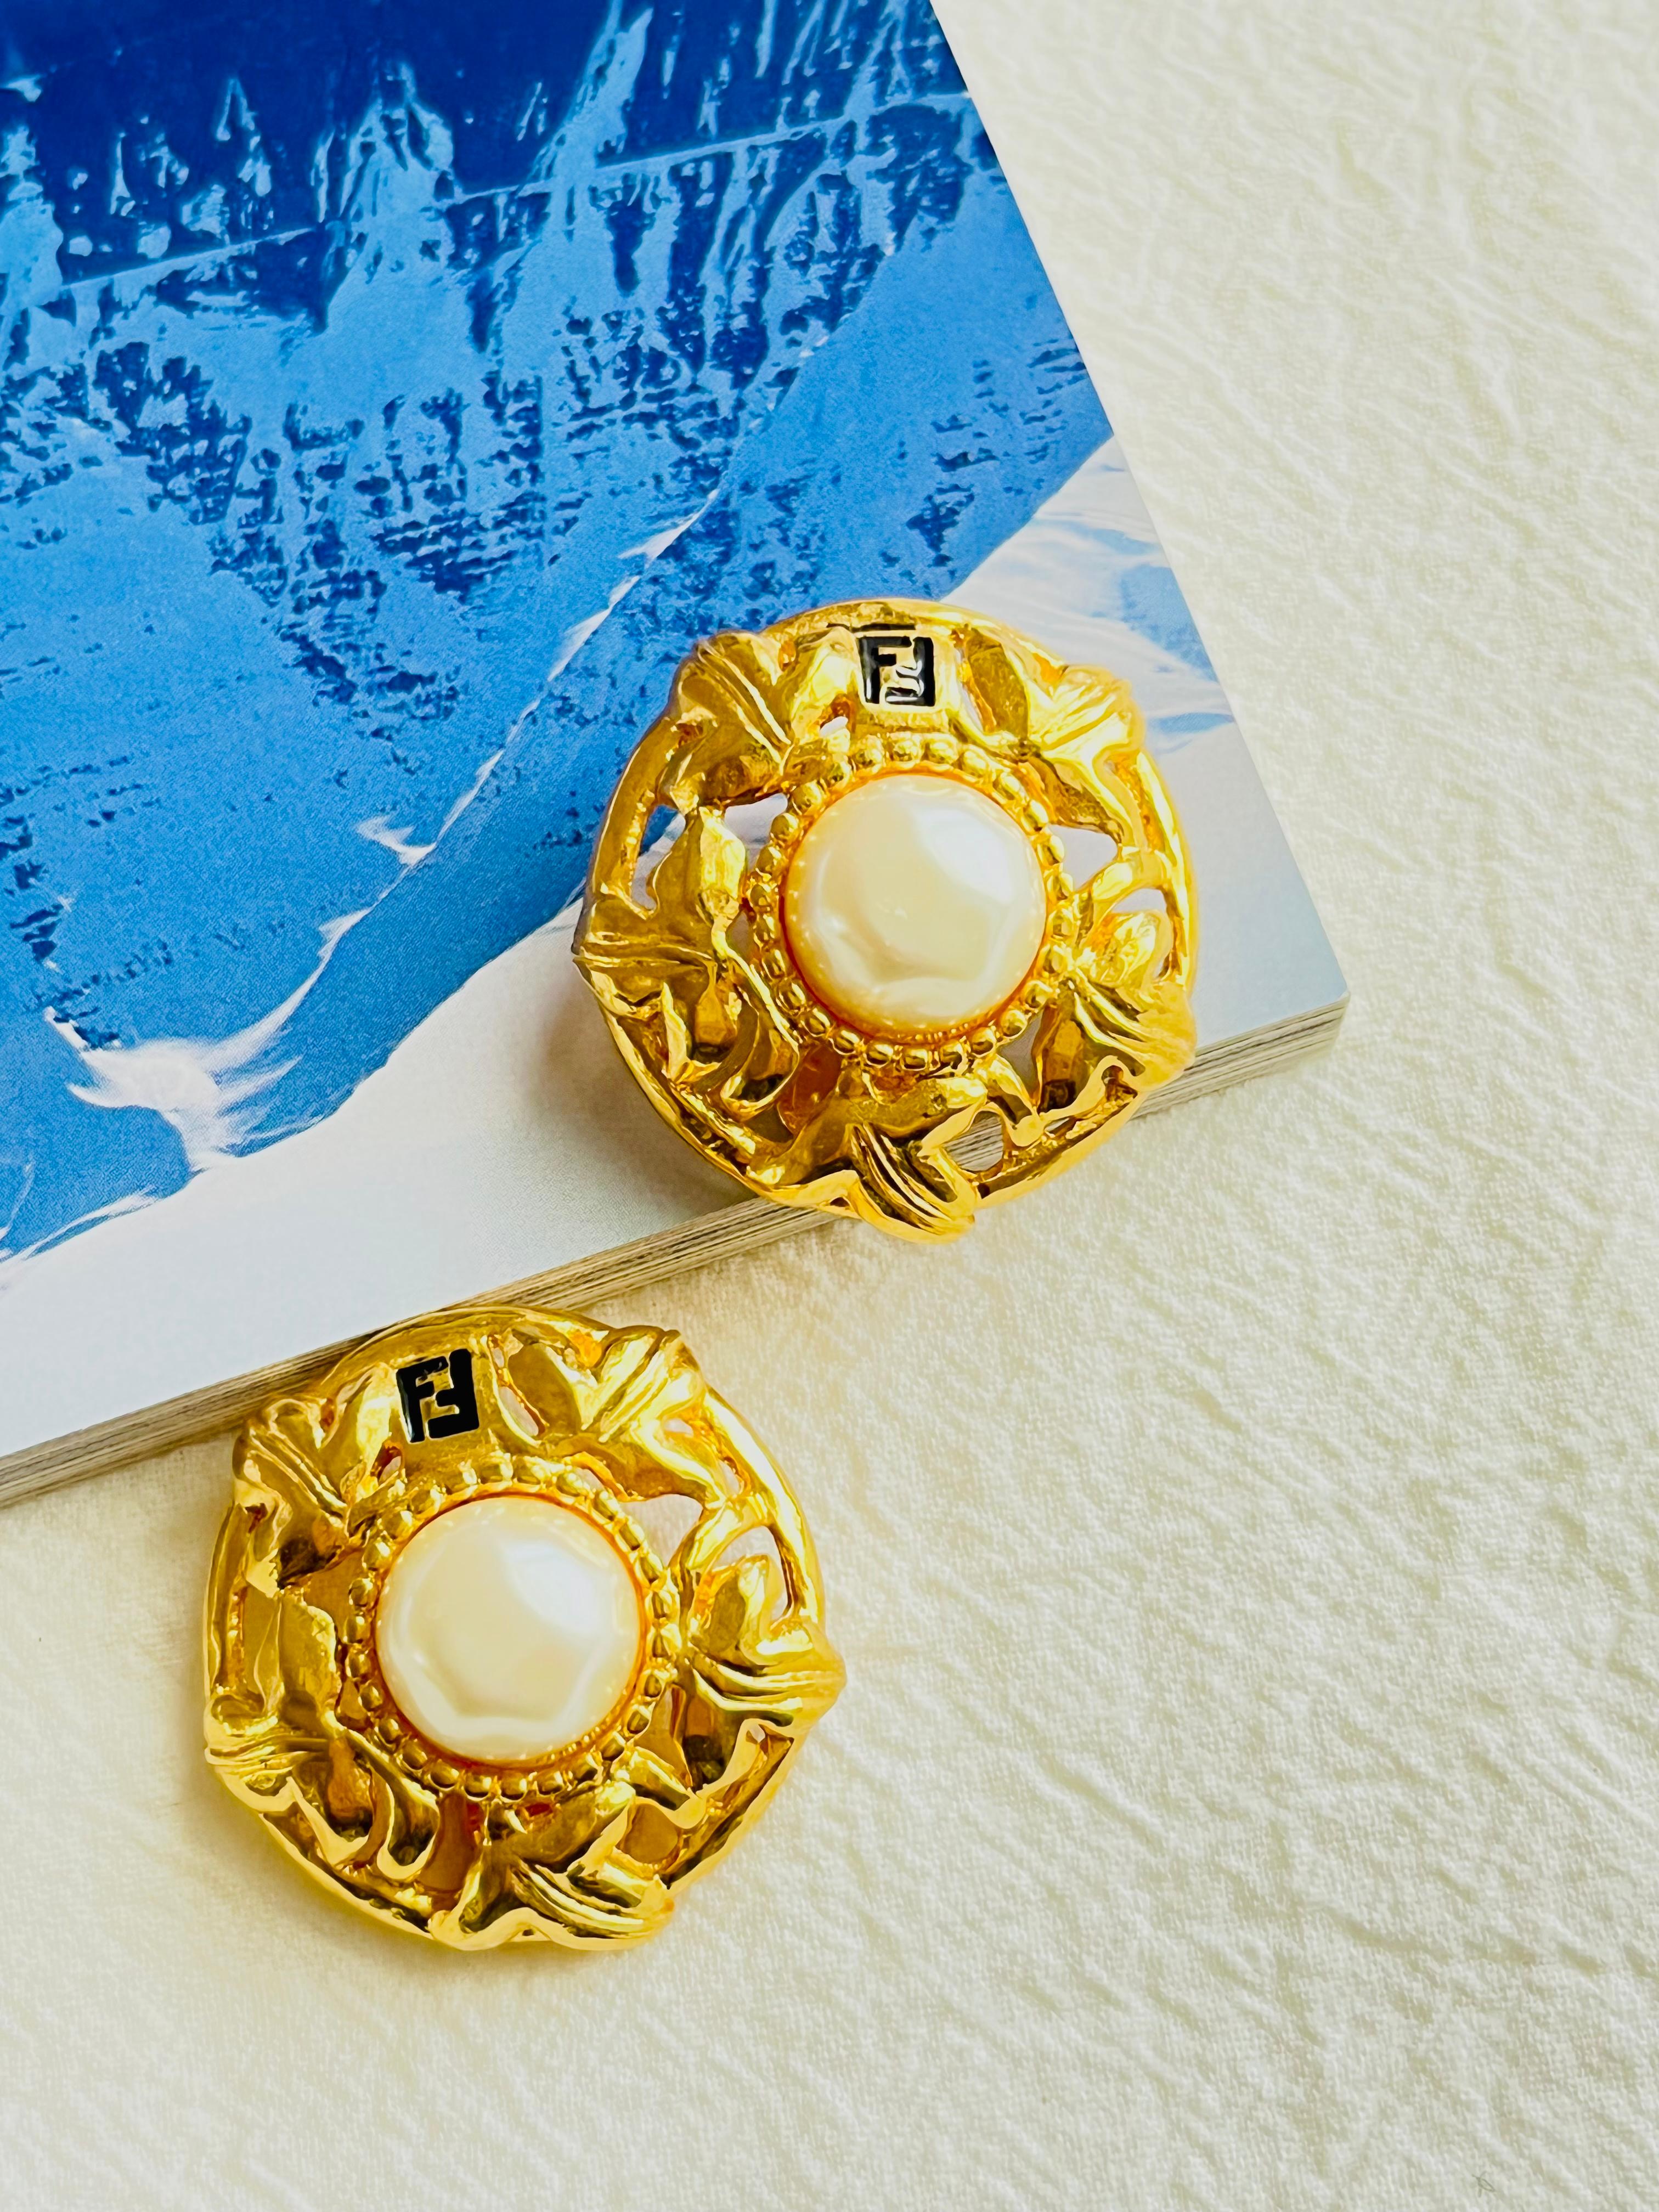 A very beautiful pair of clip on earrings by Fendi, signed at the back. 100% Genuine

Very excellent condition. Looks very new. 100% genuine. Unique design.

Size: 3.3*3.3 cm.

Weight: 17.0 g/each.

_ _ _

Great for everyday wear. Come with velvet